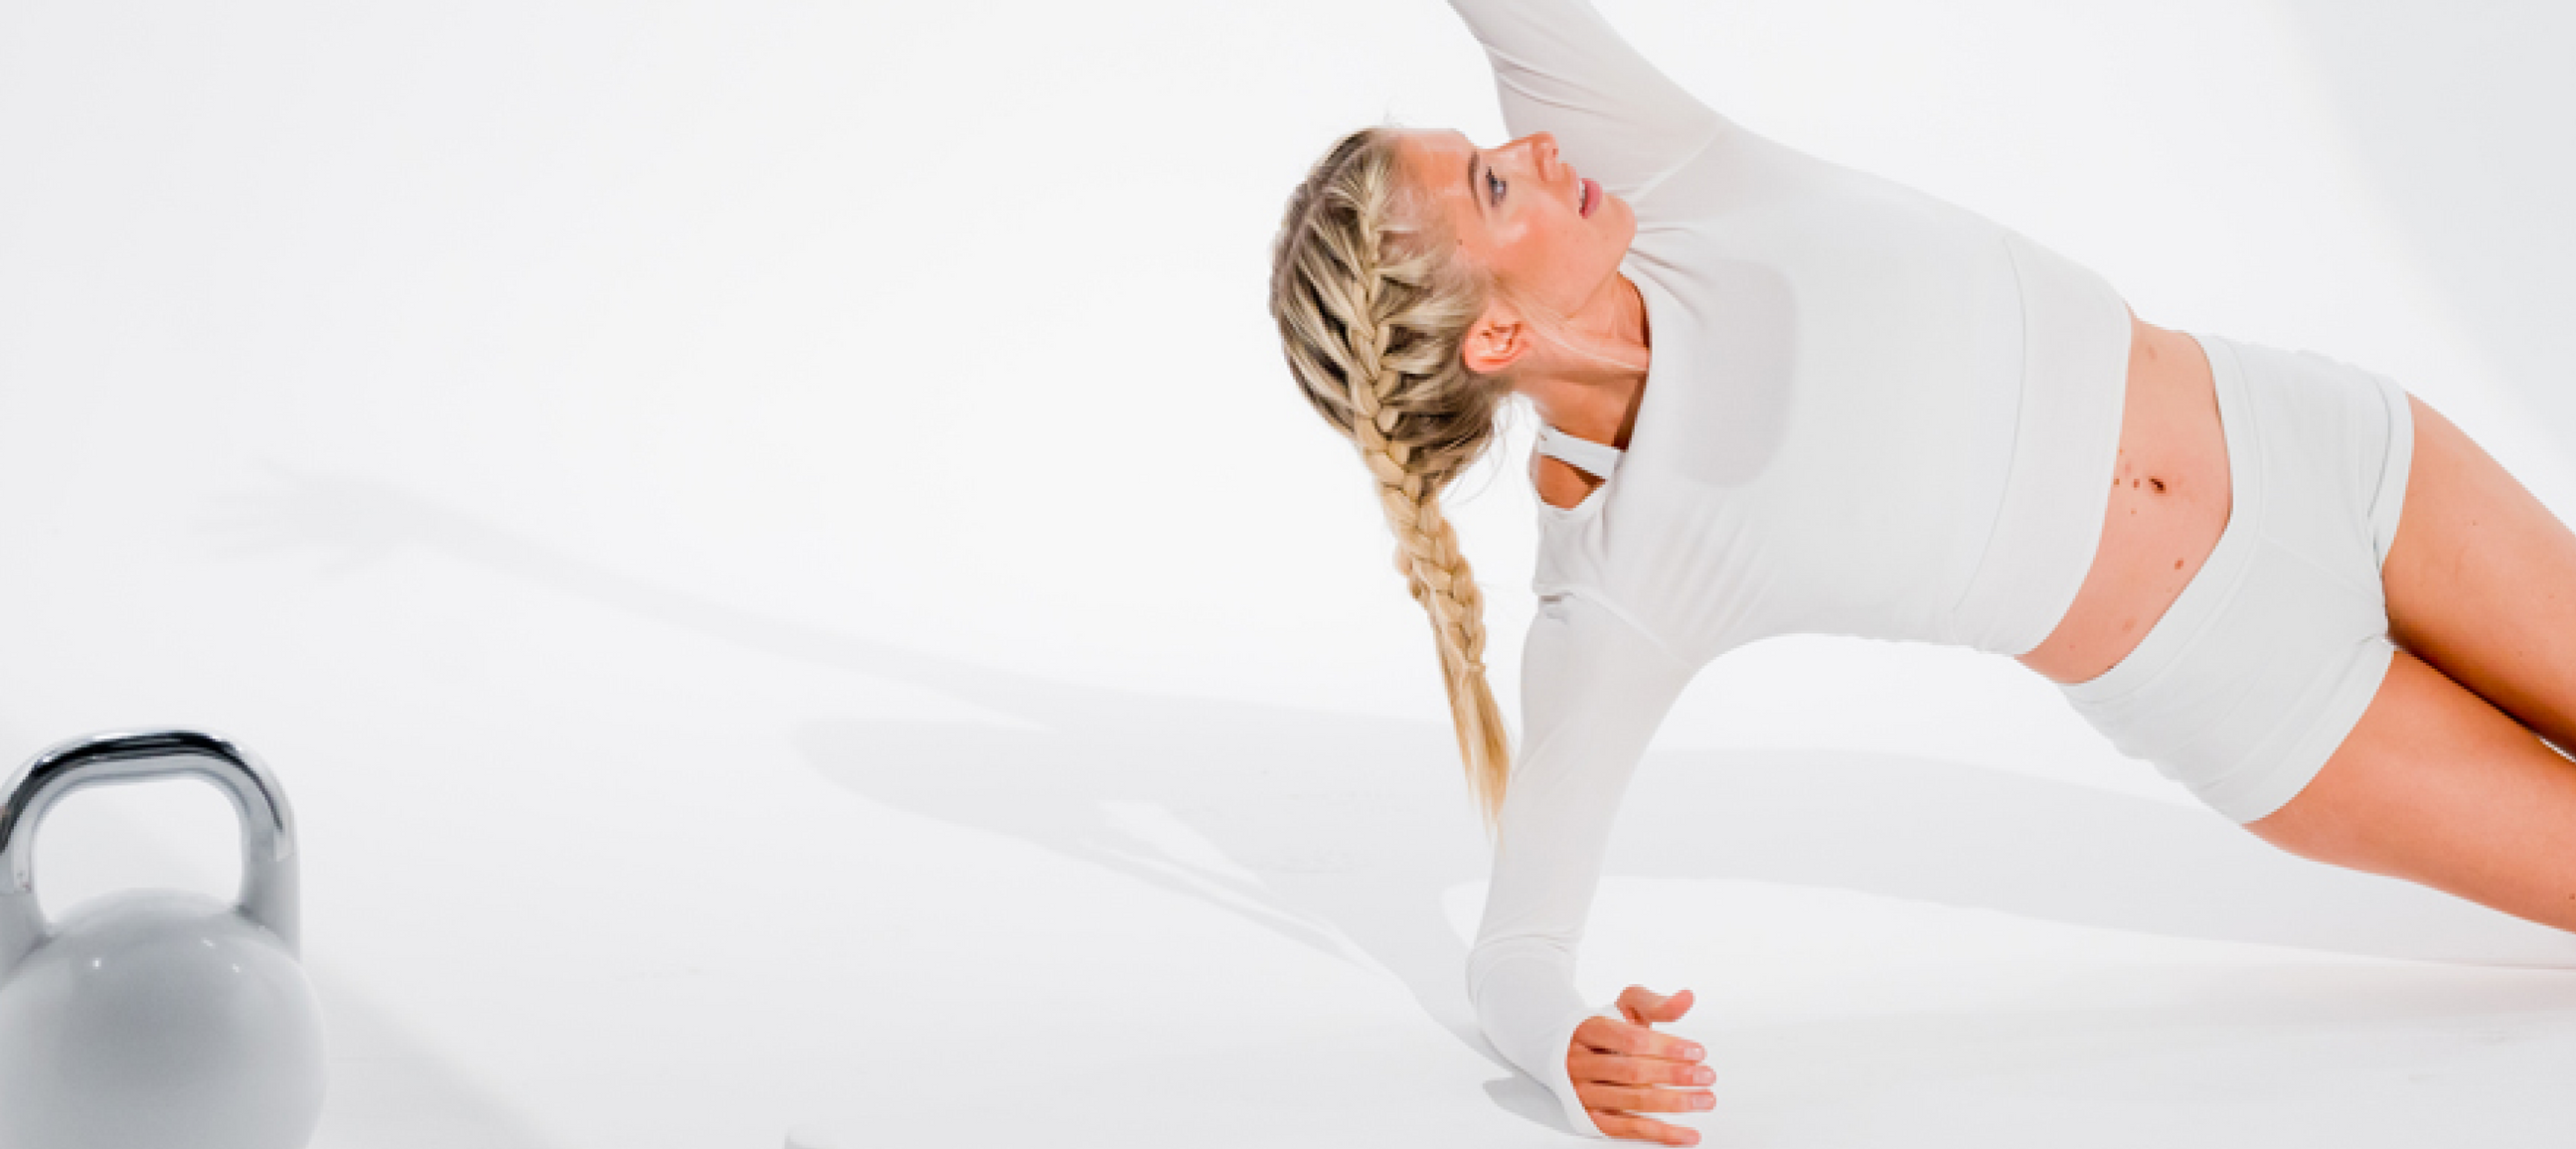 Woman doing yoga pose in white sport clothes